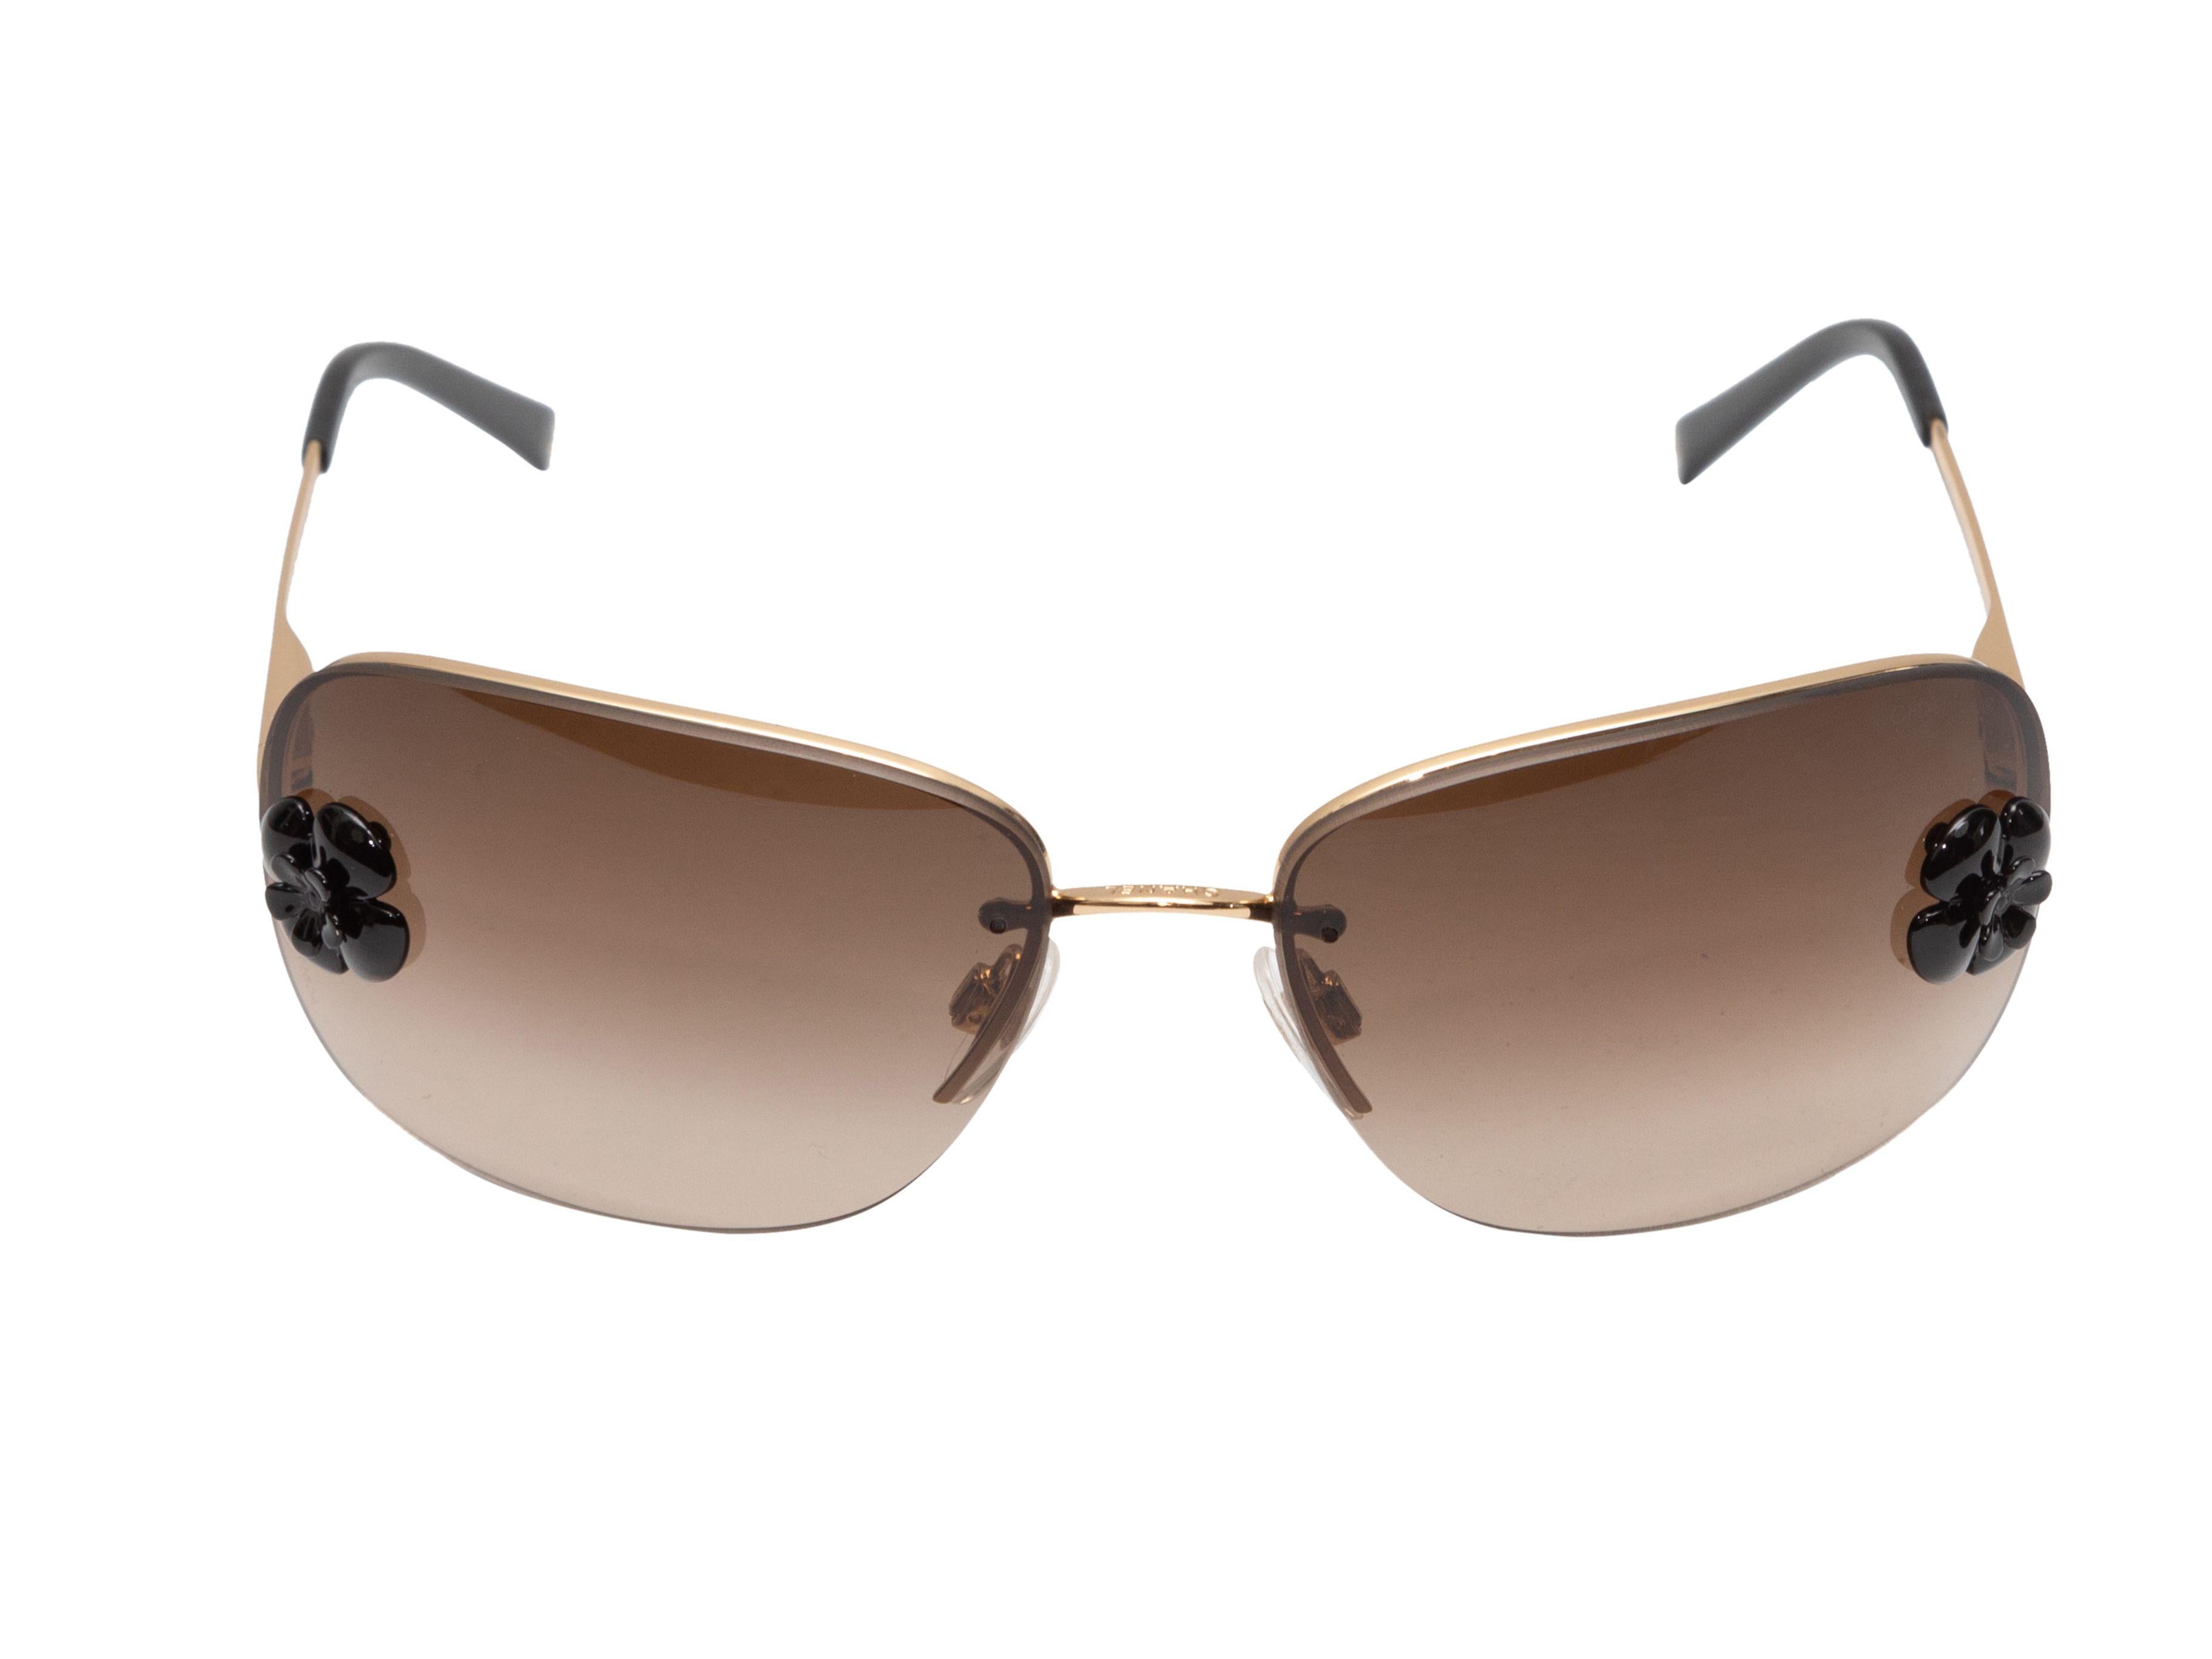 Product Details: Gold-tone metal rectangular sunglasses by Chanel. Brown tinted lenses. Black camellia accents at temples. 1.75